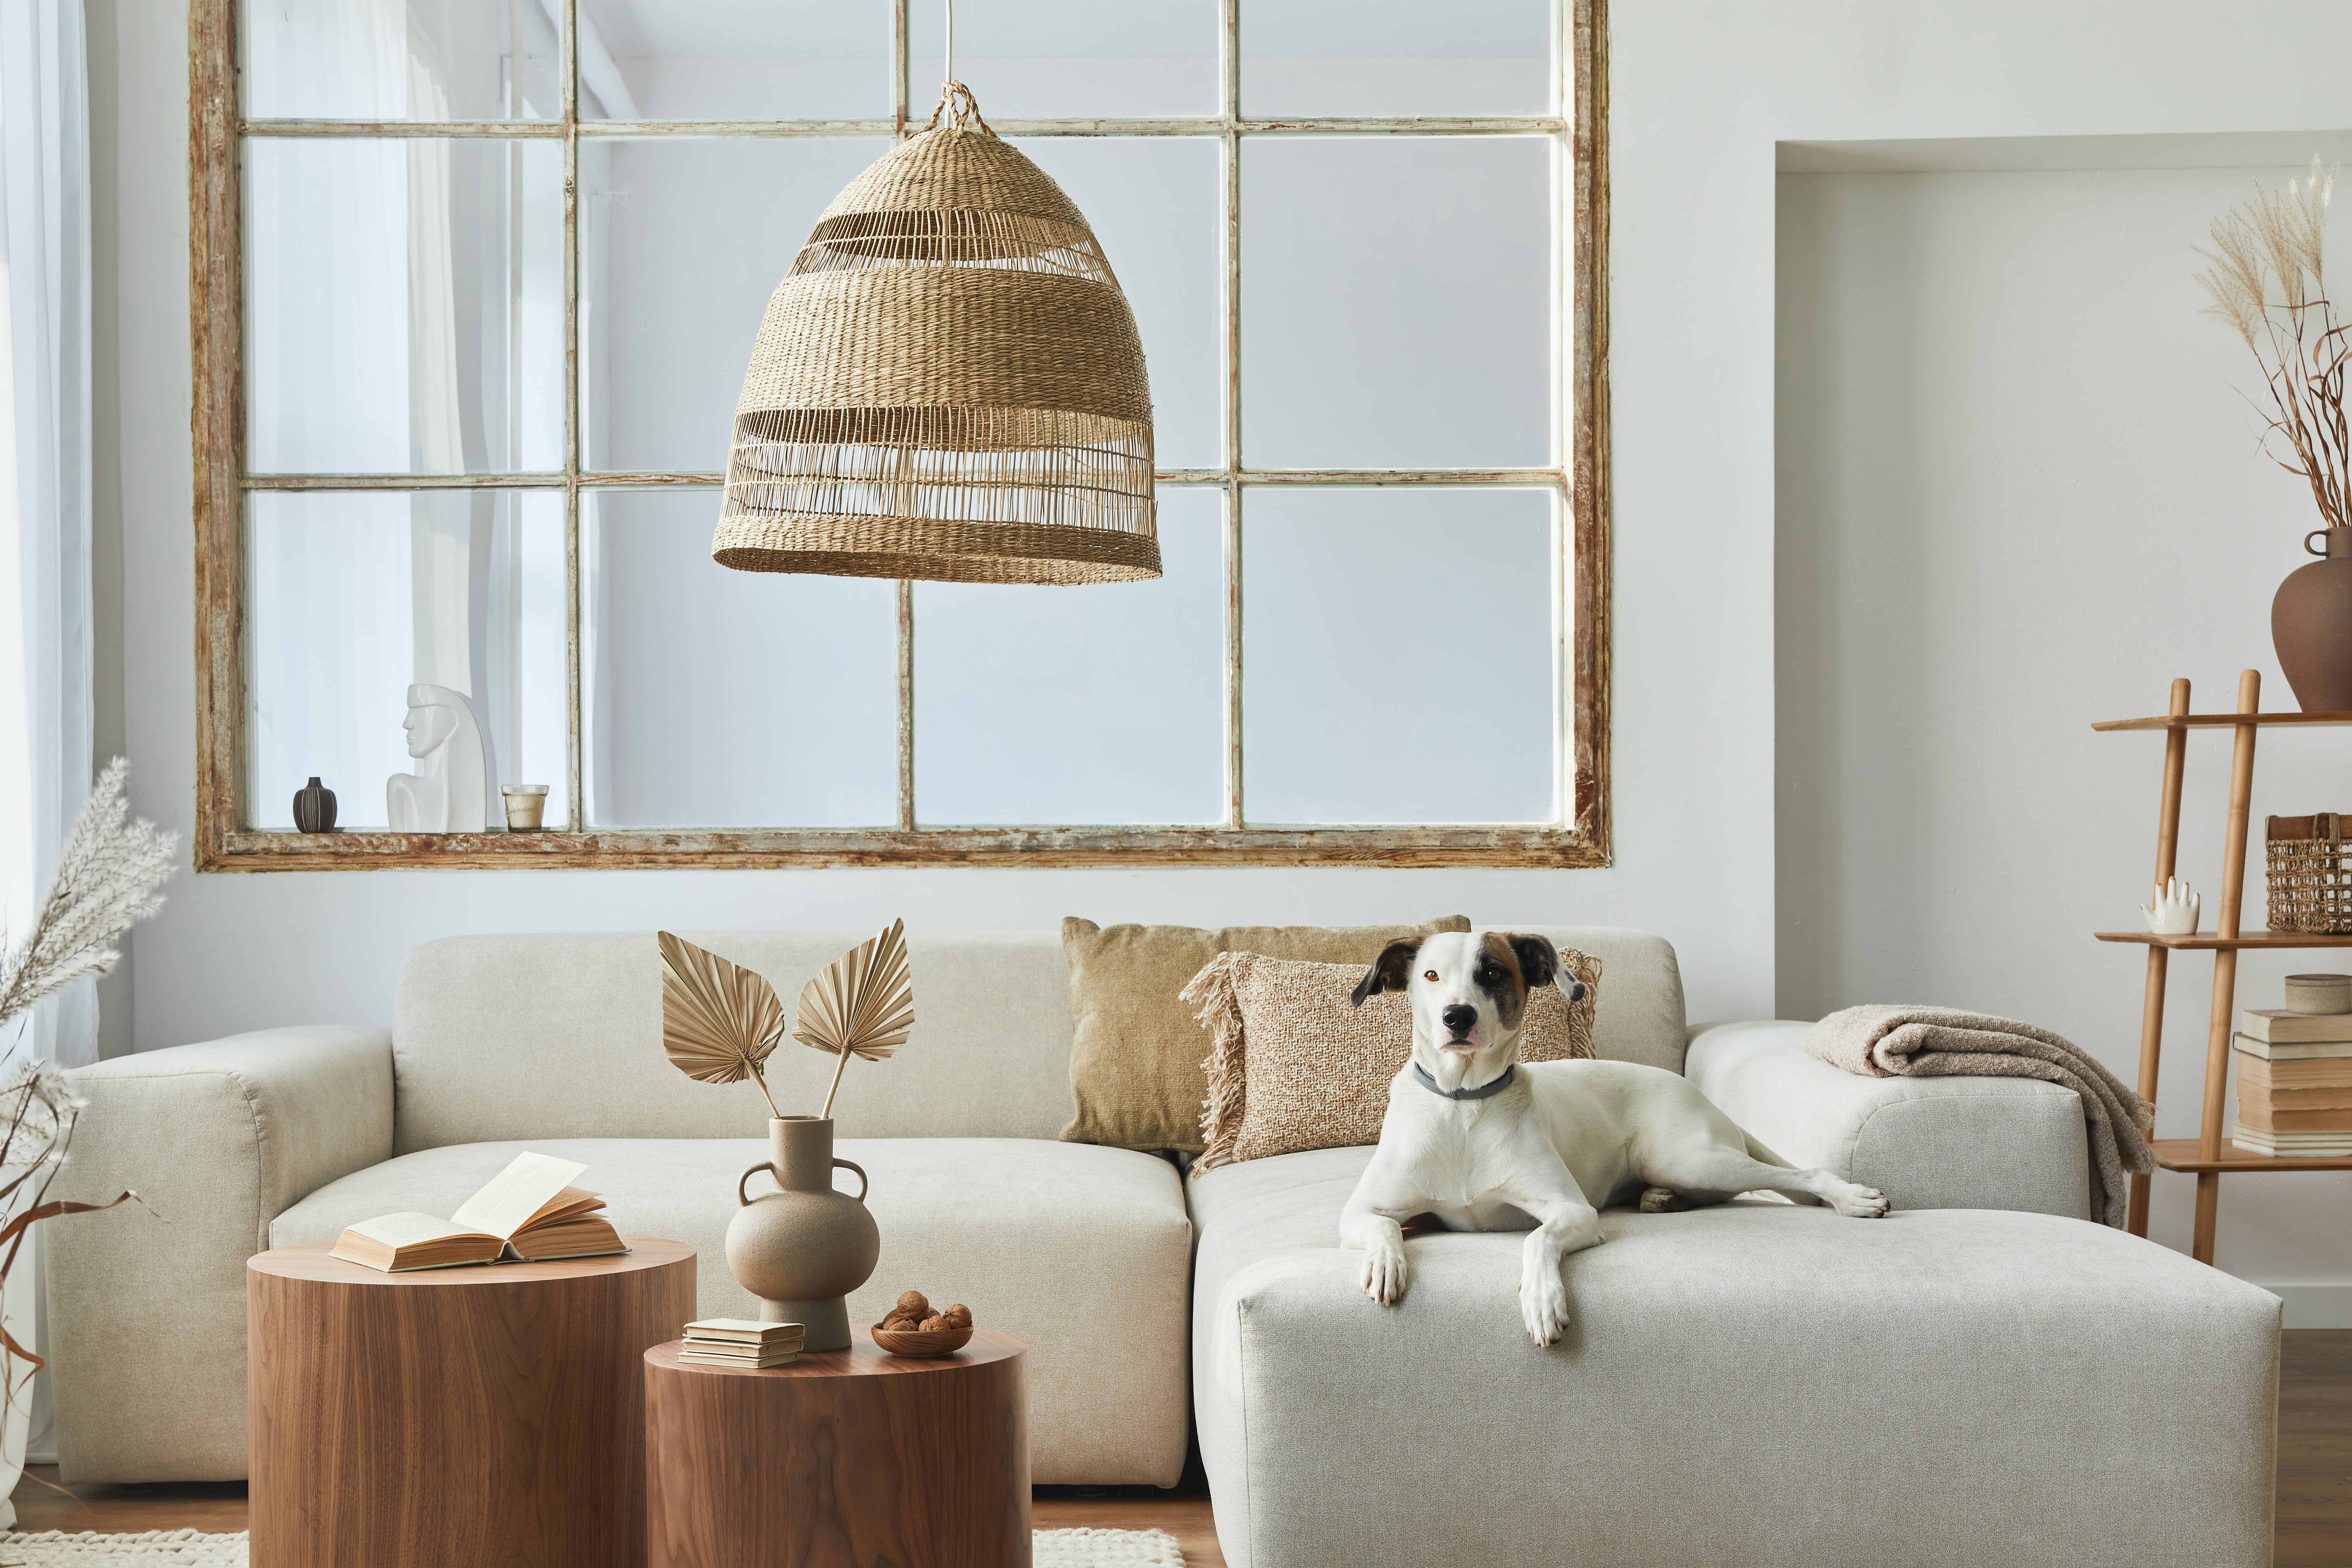 6 Dog Room Decor Ideas That'll Make A Friendly Home For Pets!